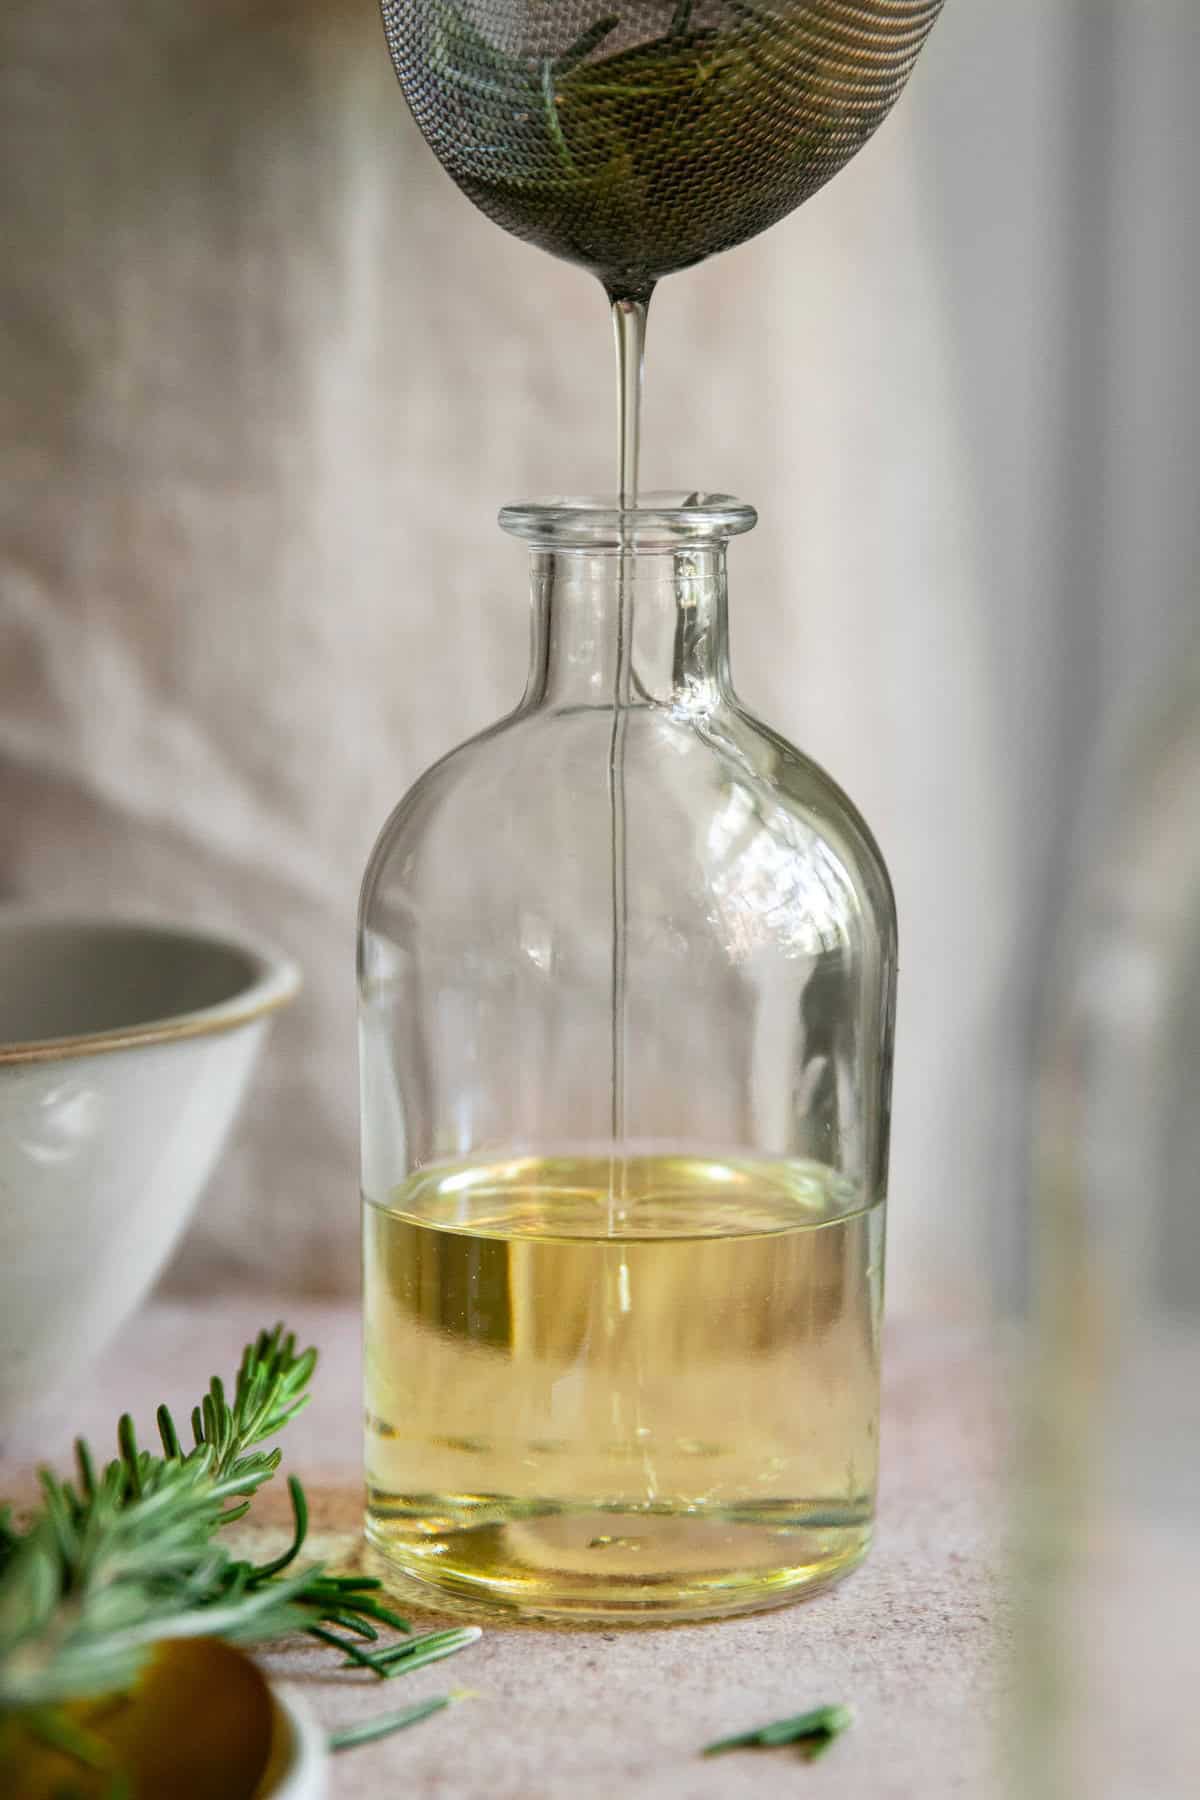 Strain out rosemary after infusing for 2 weeks